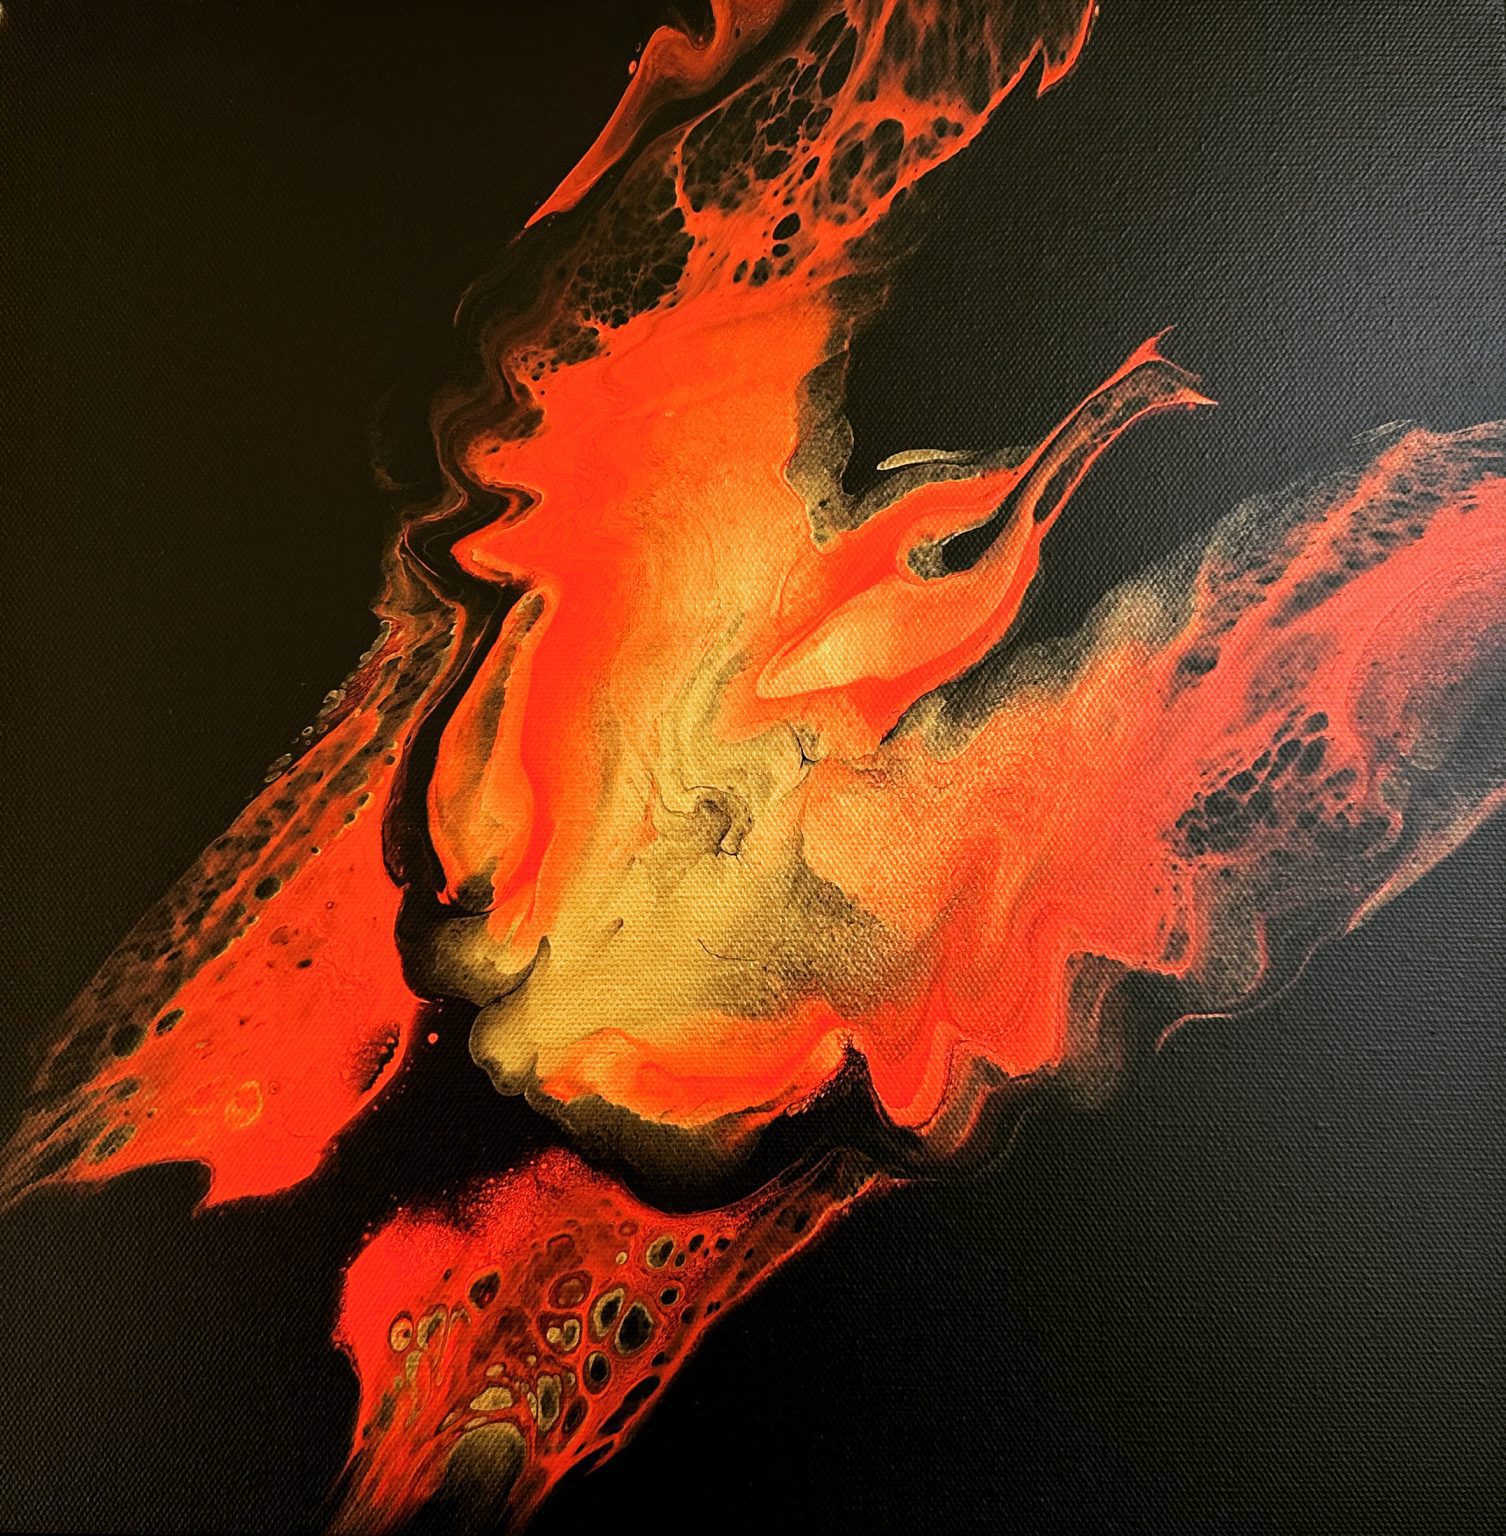 Black background with an abstract depiction of a phoenix rising from ashes